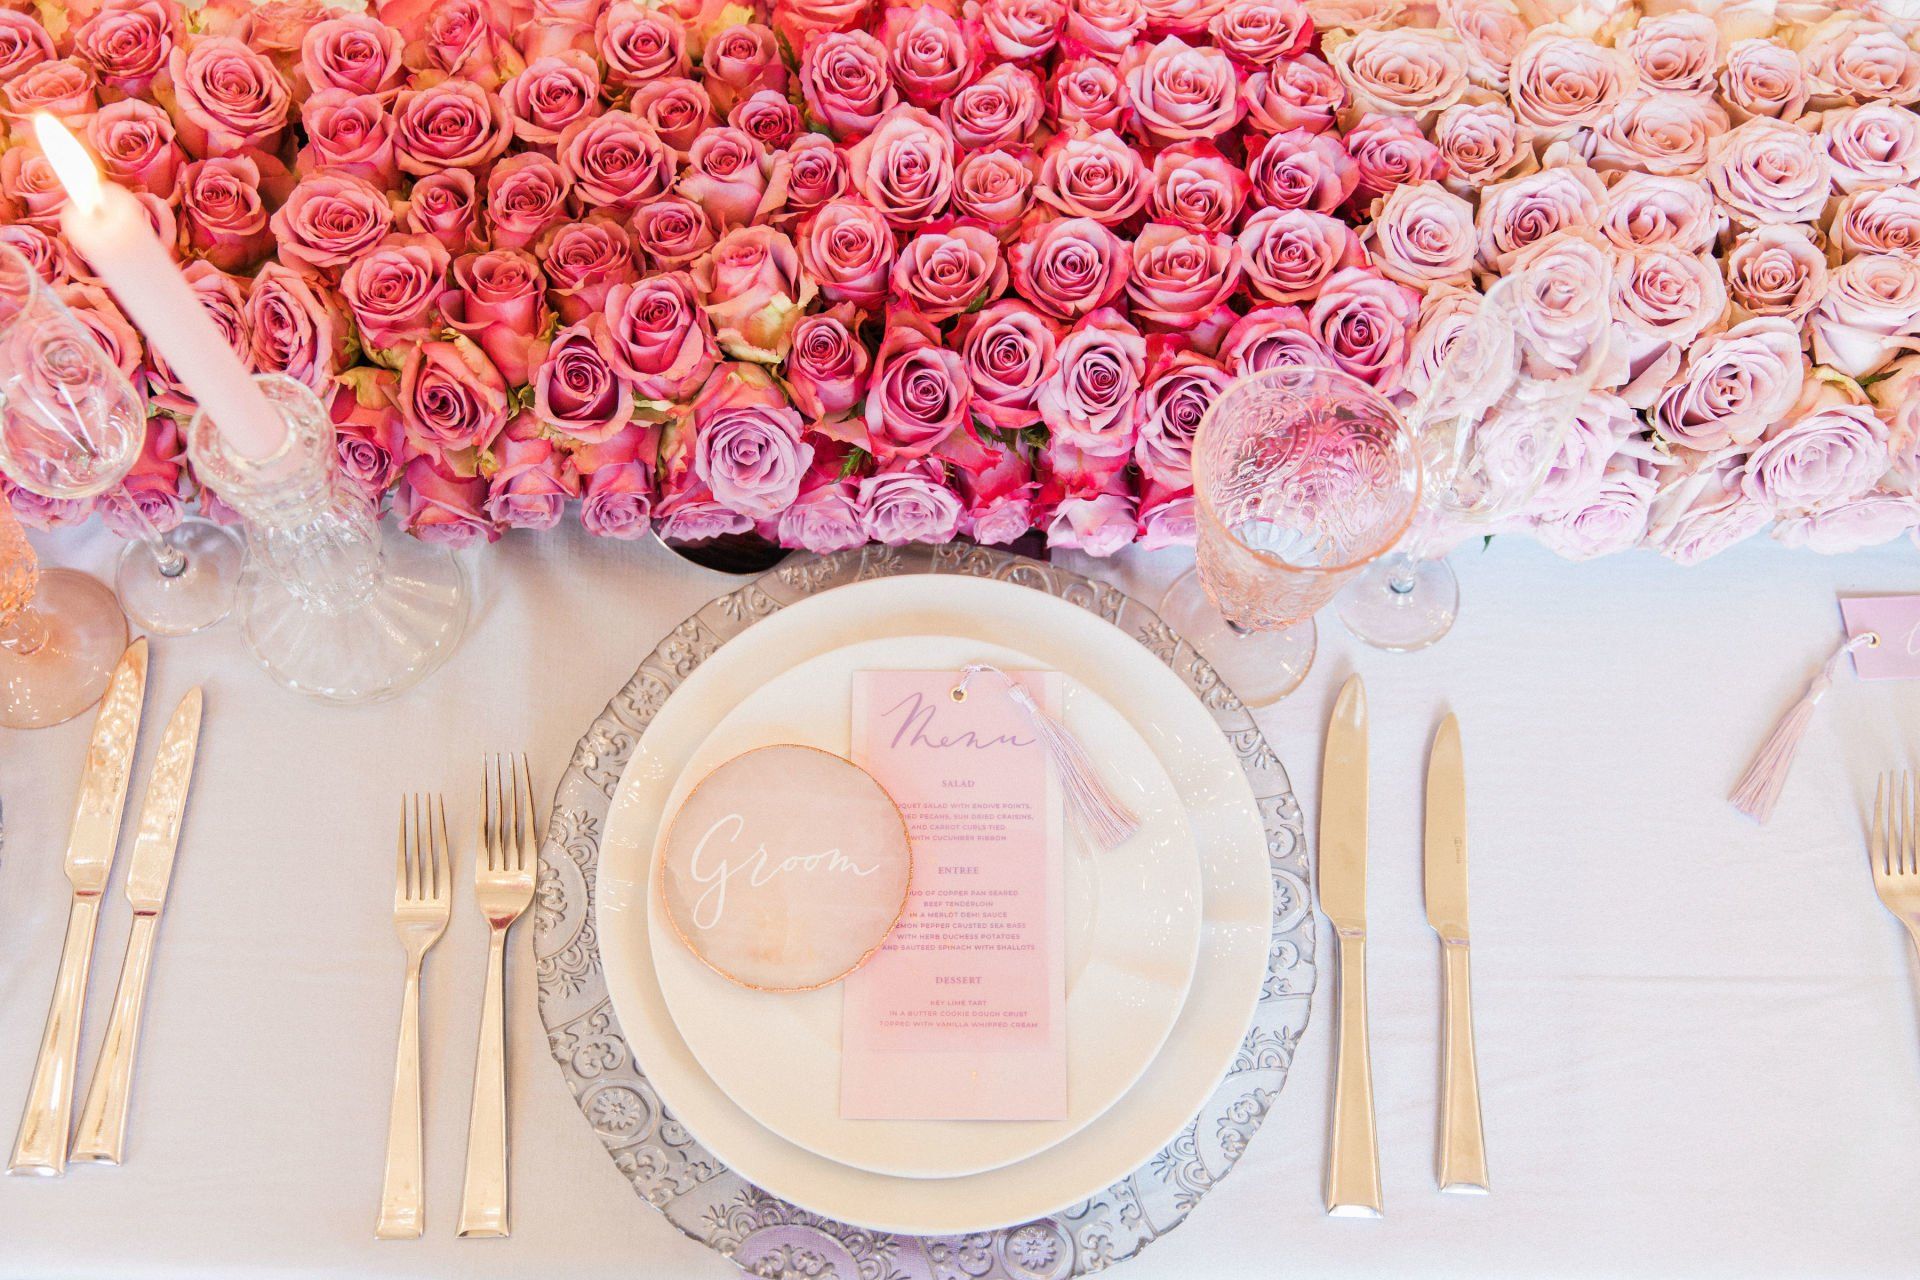 Wedding table design pink and lilac roses